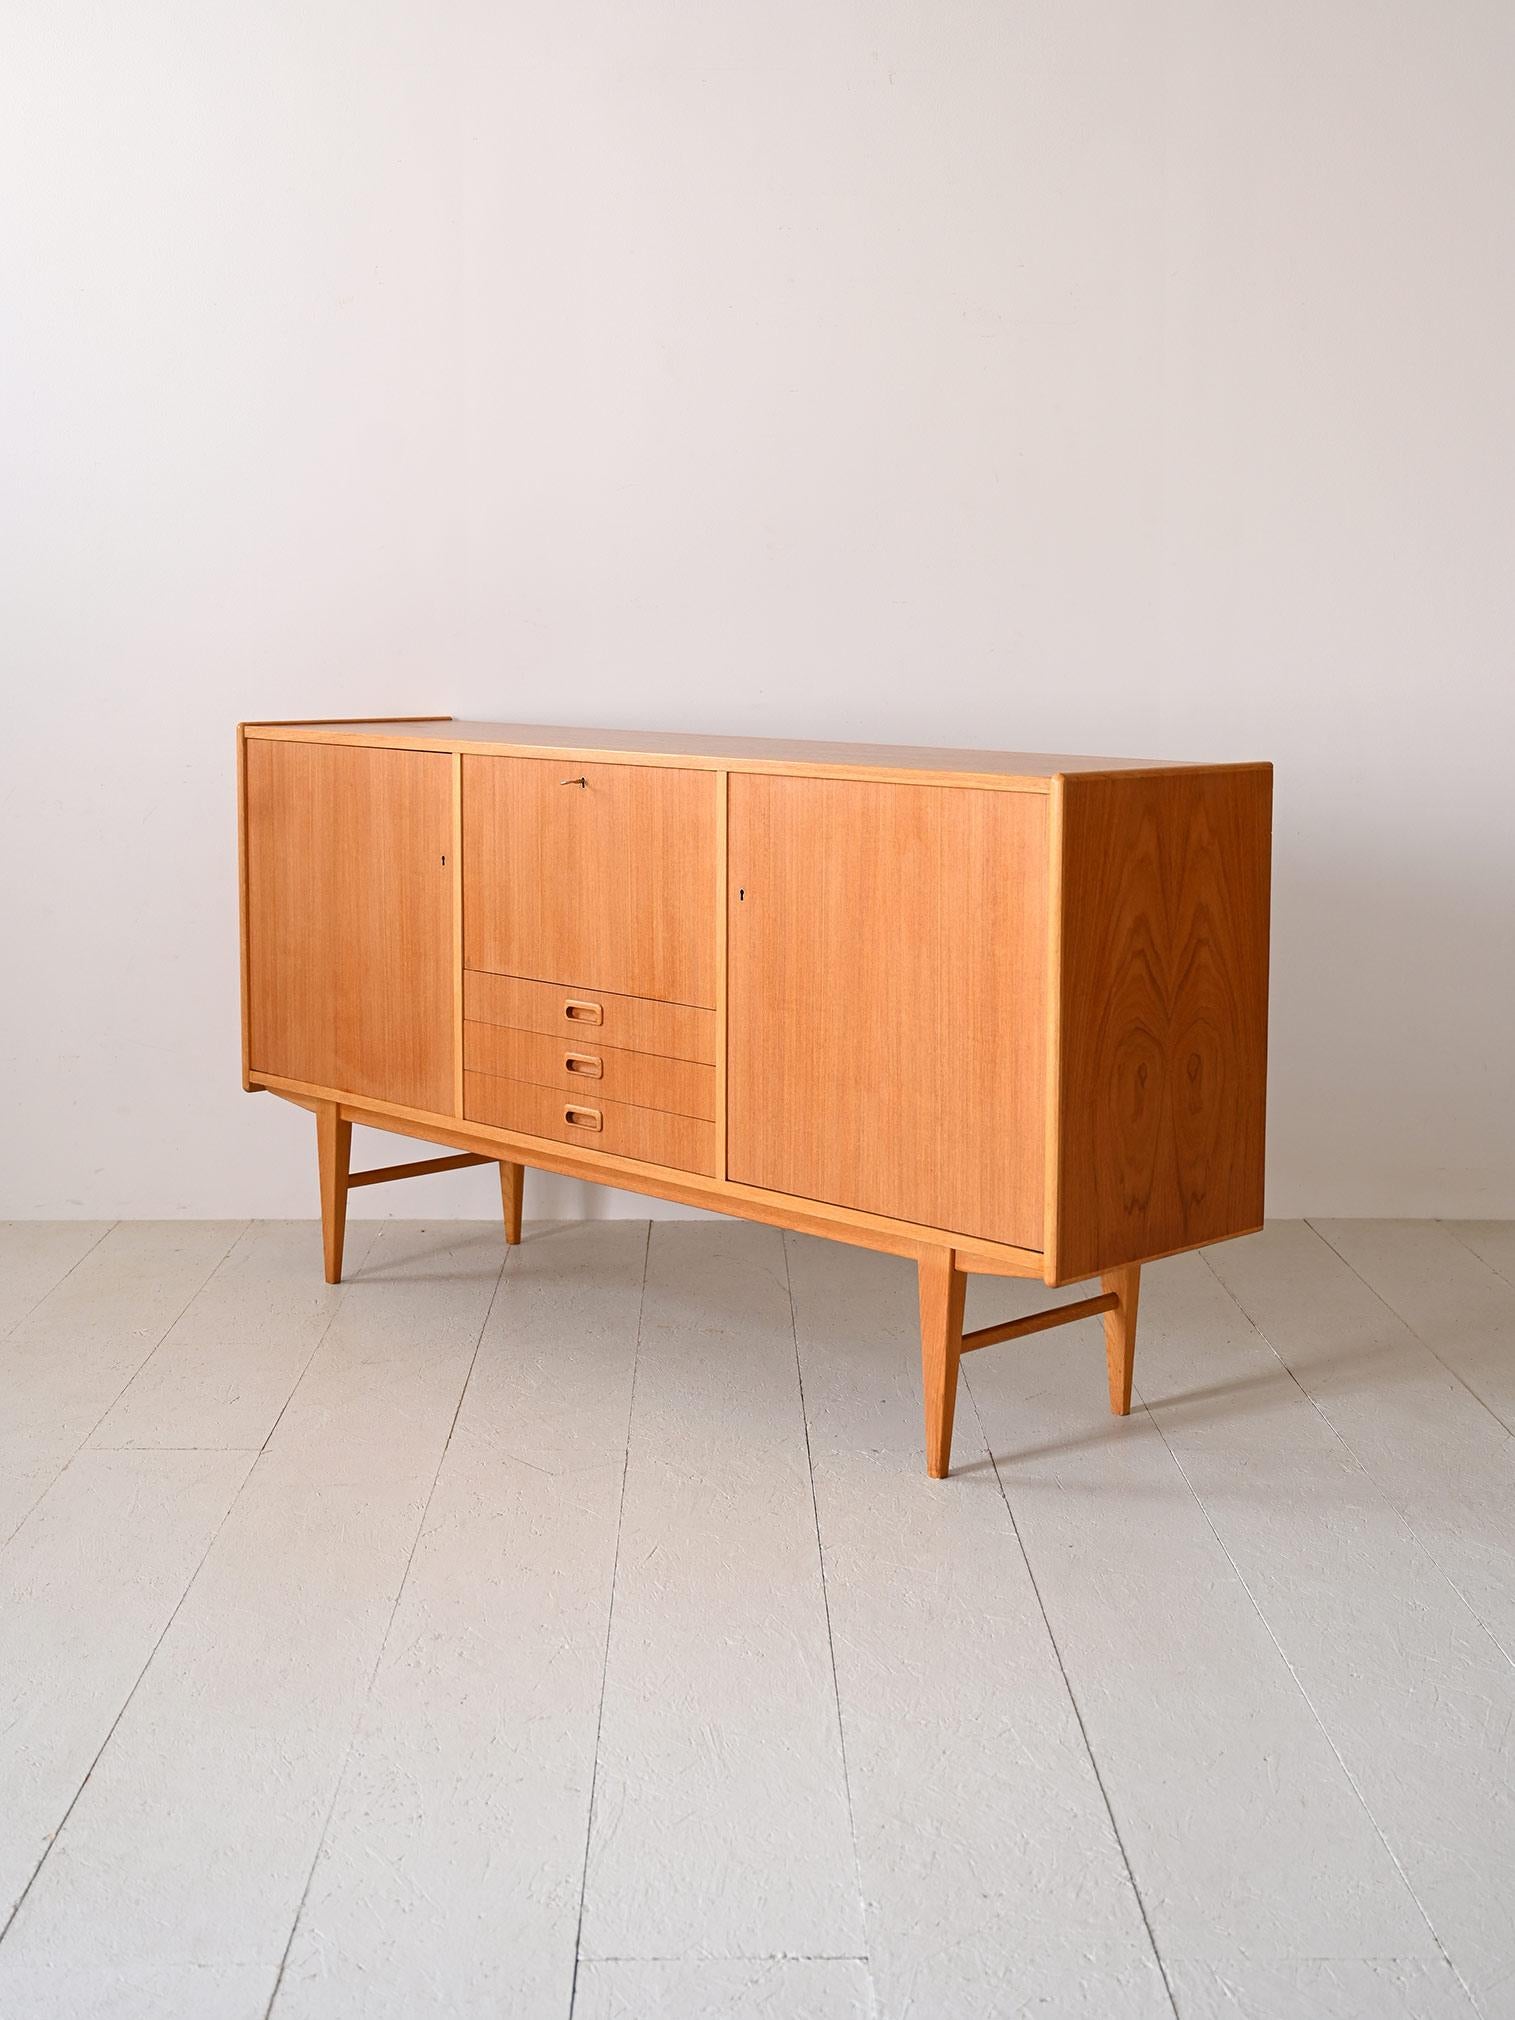 Mid-20th Century Oak sideboard with drawers